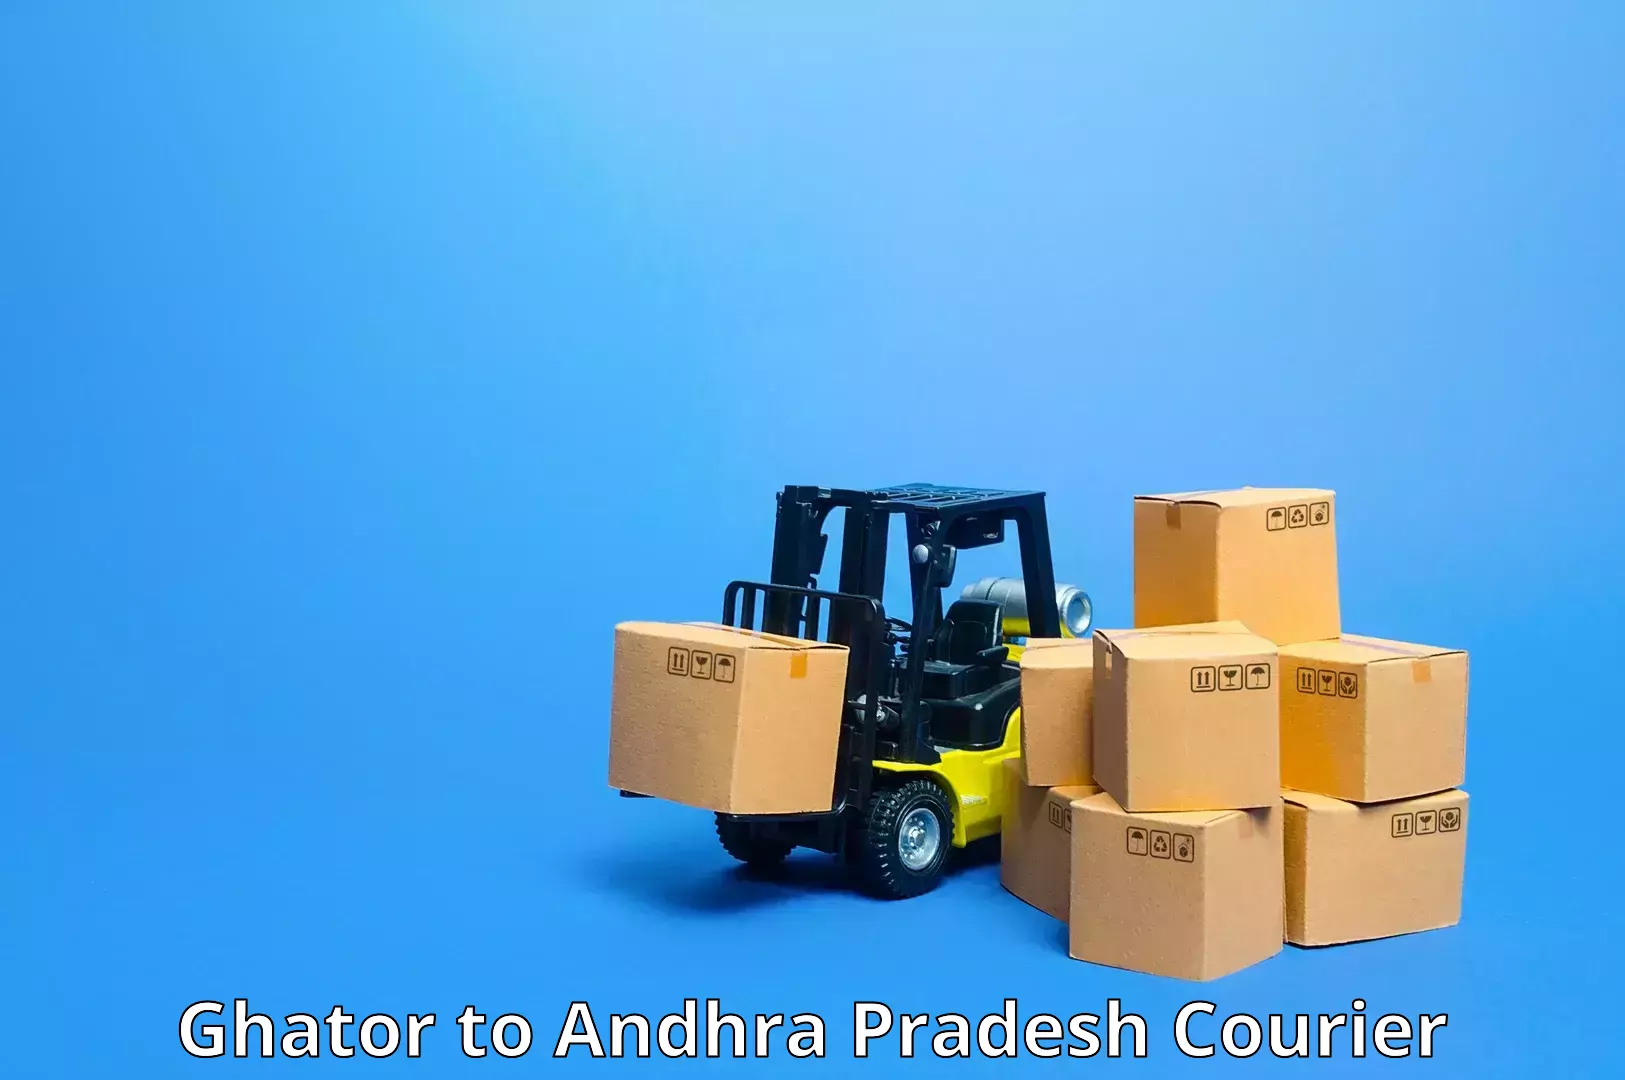 Overnight delivery services Ghator to Visakhapatnam